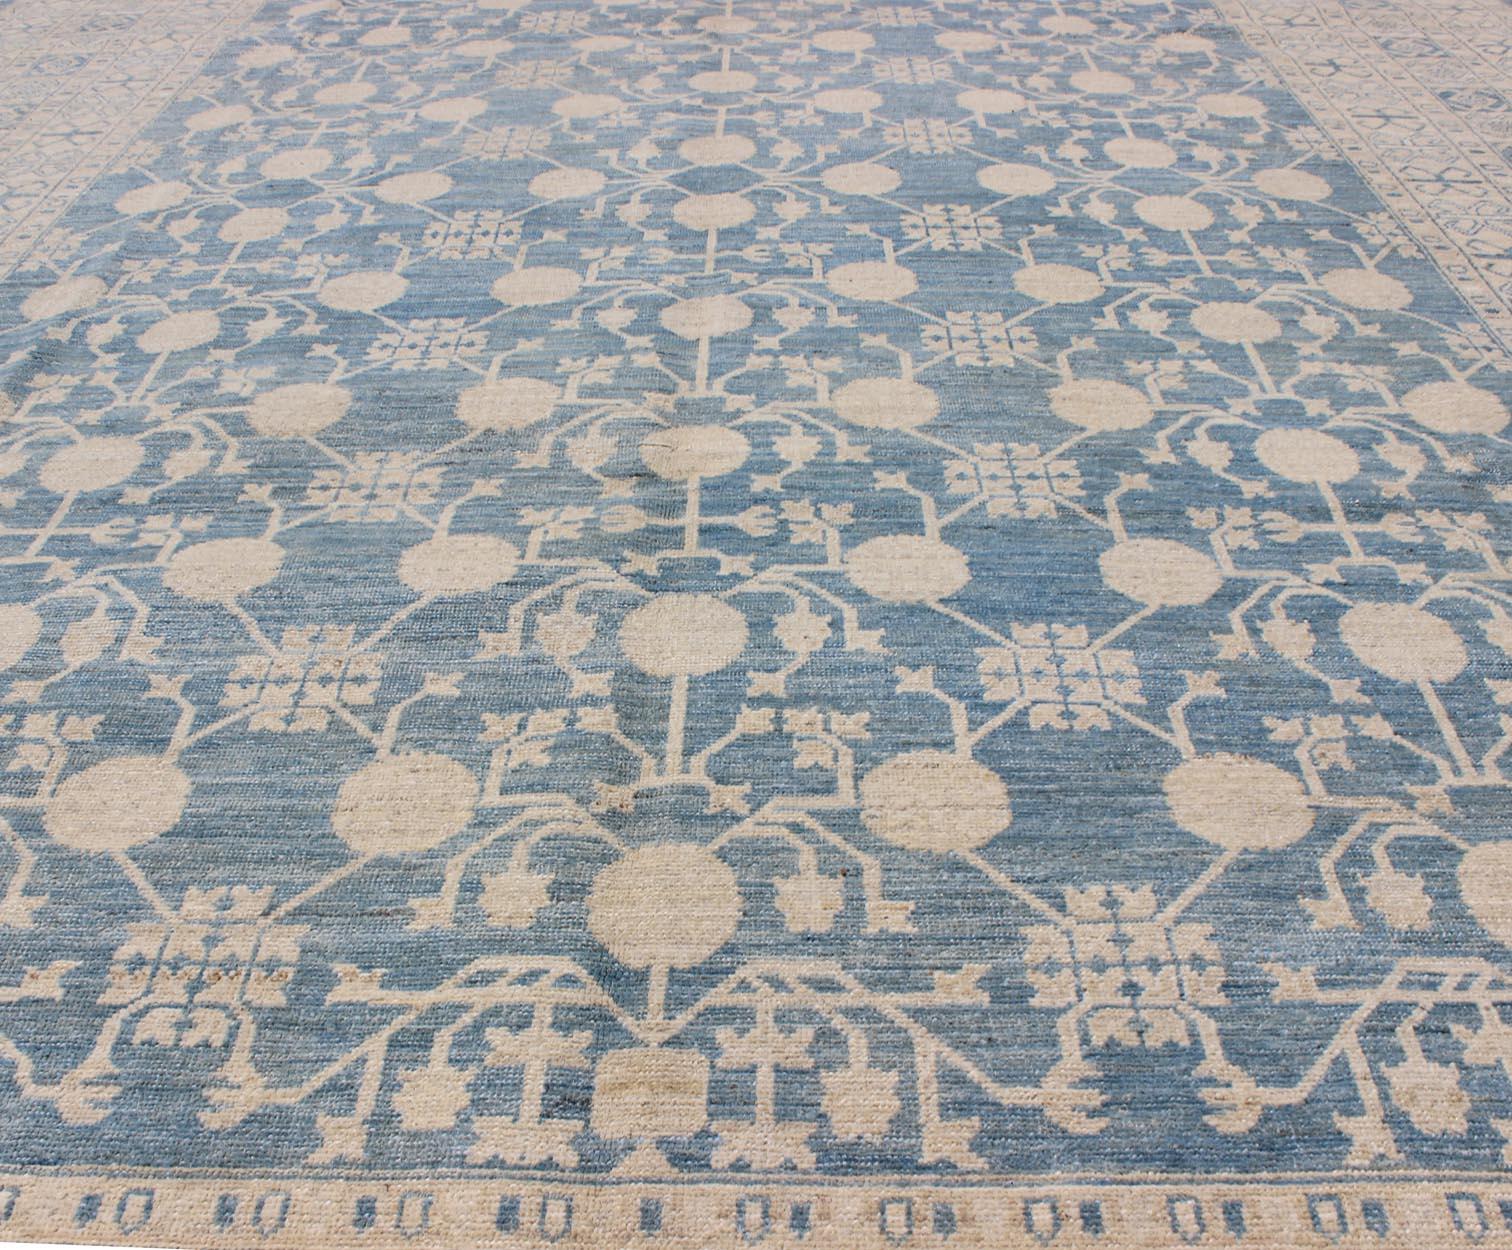 Large Pomegranate Design Modern Khotan Rug in Light Blue and Cream. Keivan Woven Arts / rug MP-1309-655, country of origin / type: Afghanistan / Khotan.
Measures: 8'7 x 12'5 
This Khotan features an all over Pomegranate design flanked by a repeating